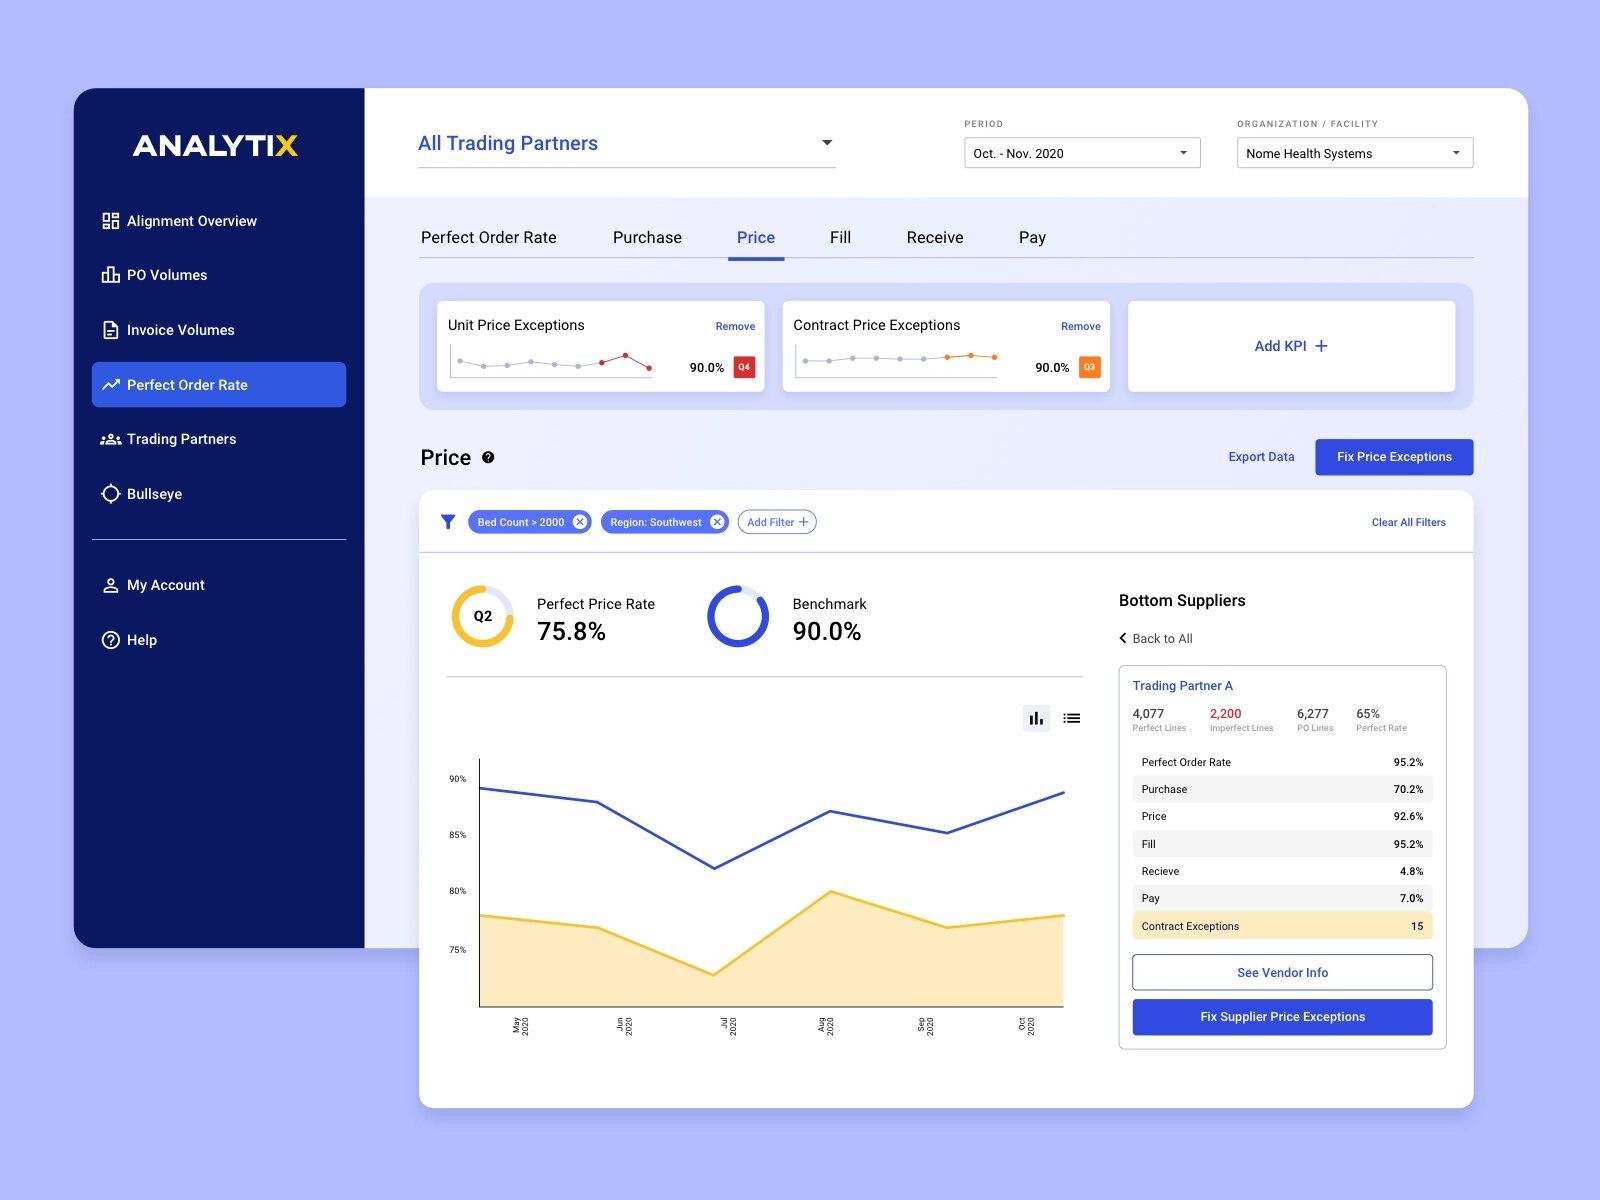 Analytical tools are highly important for food delivery app administrative panel (*image by [Kyle Goodrich](https://dribbble.com/kylegoodrich){ rel="nofollow" target="_blank" .default-md}*)